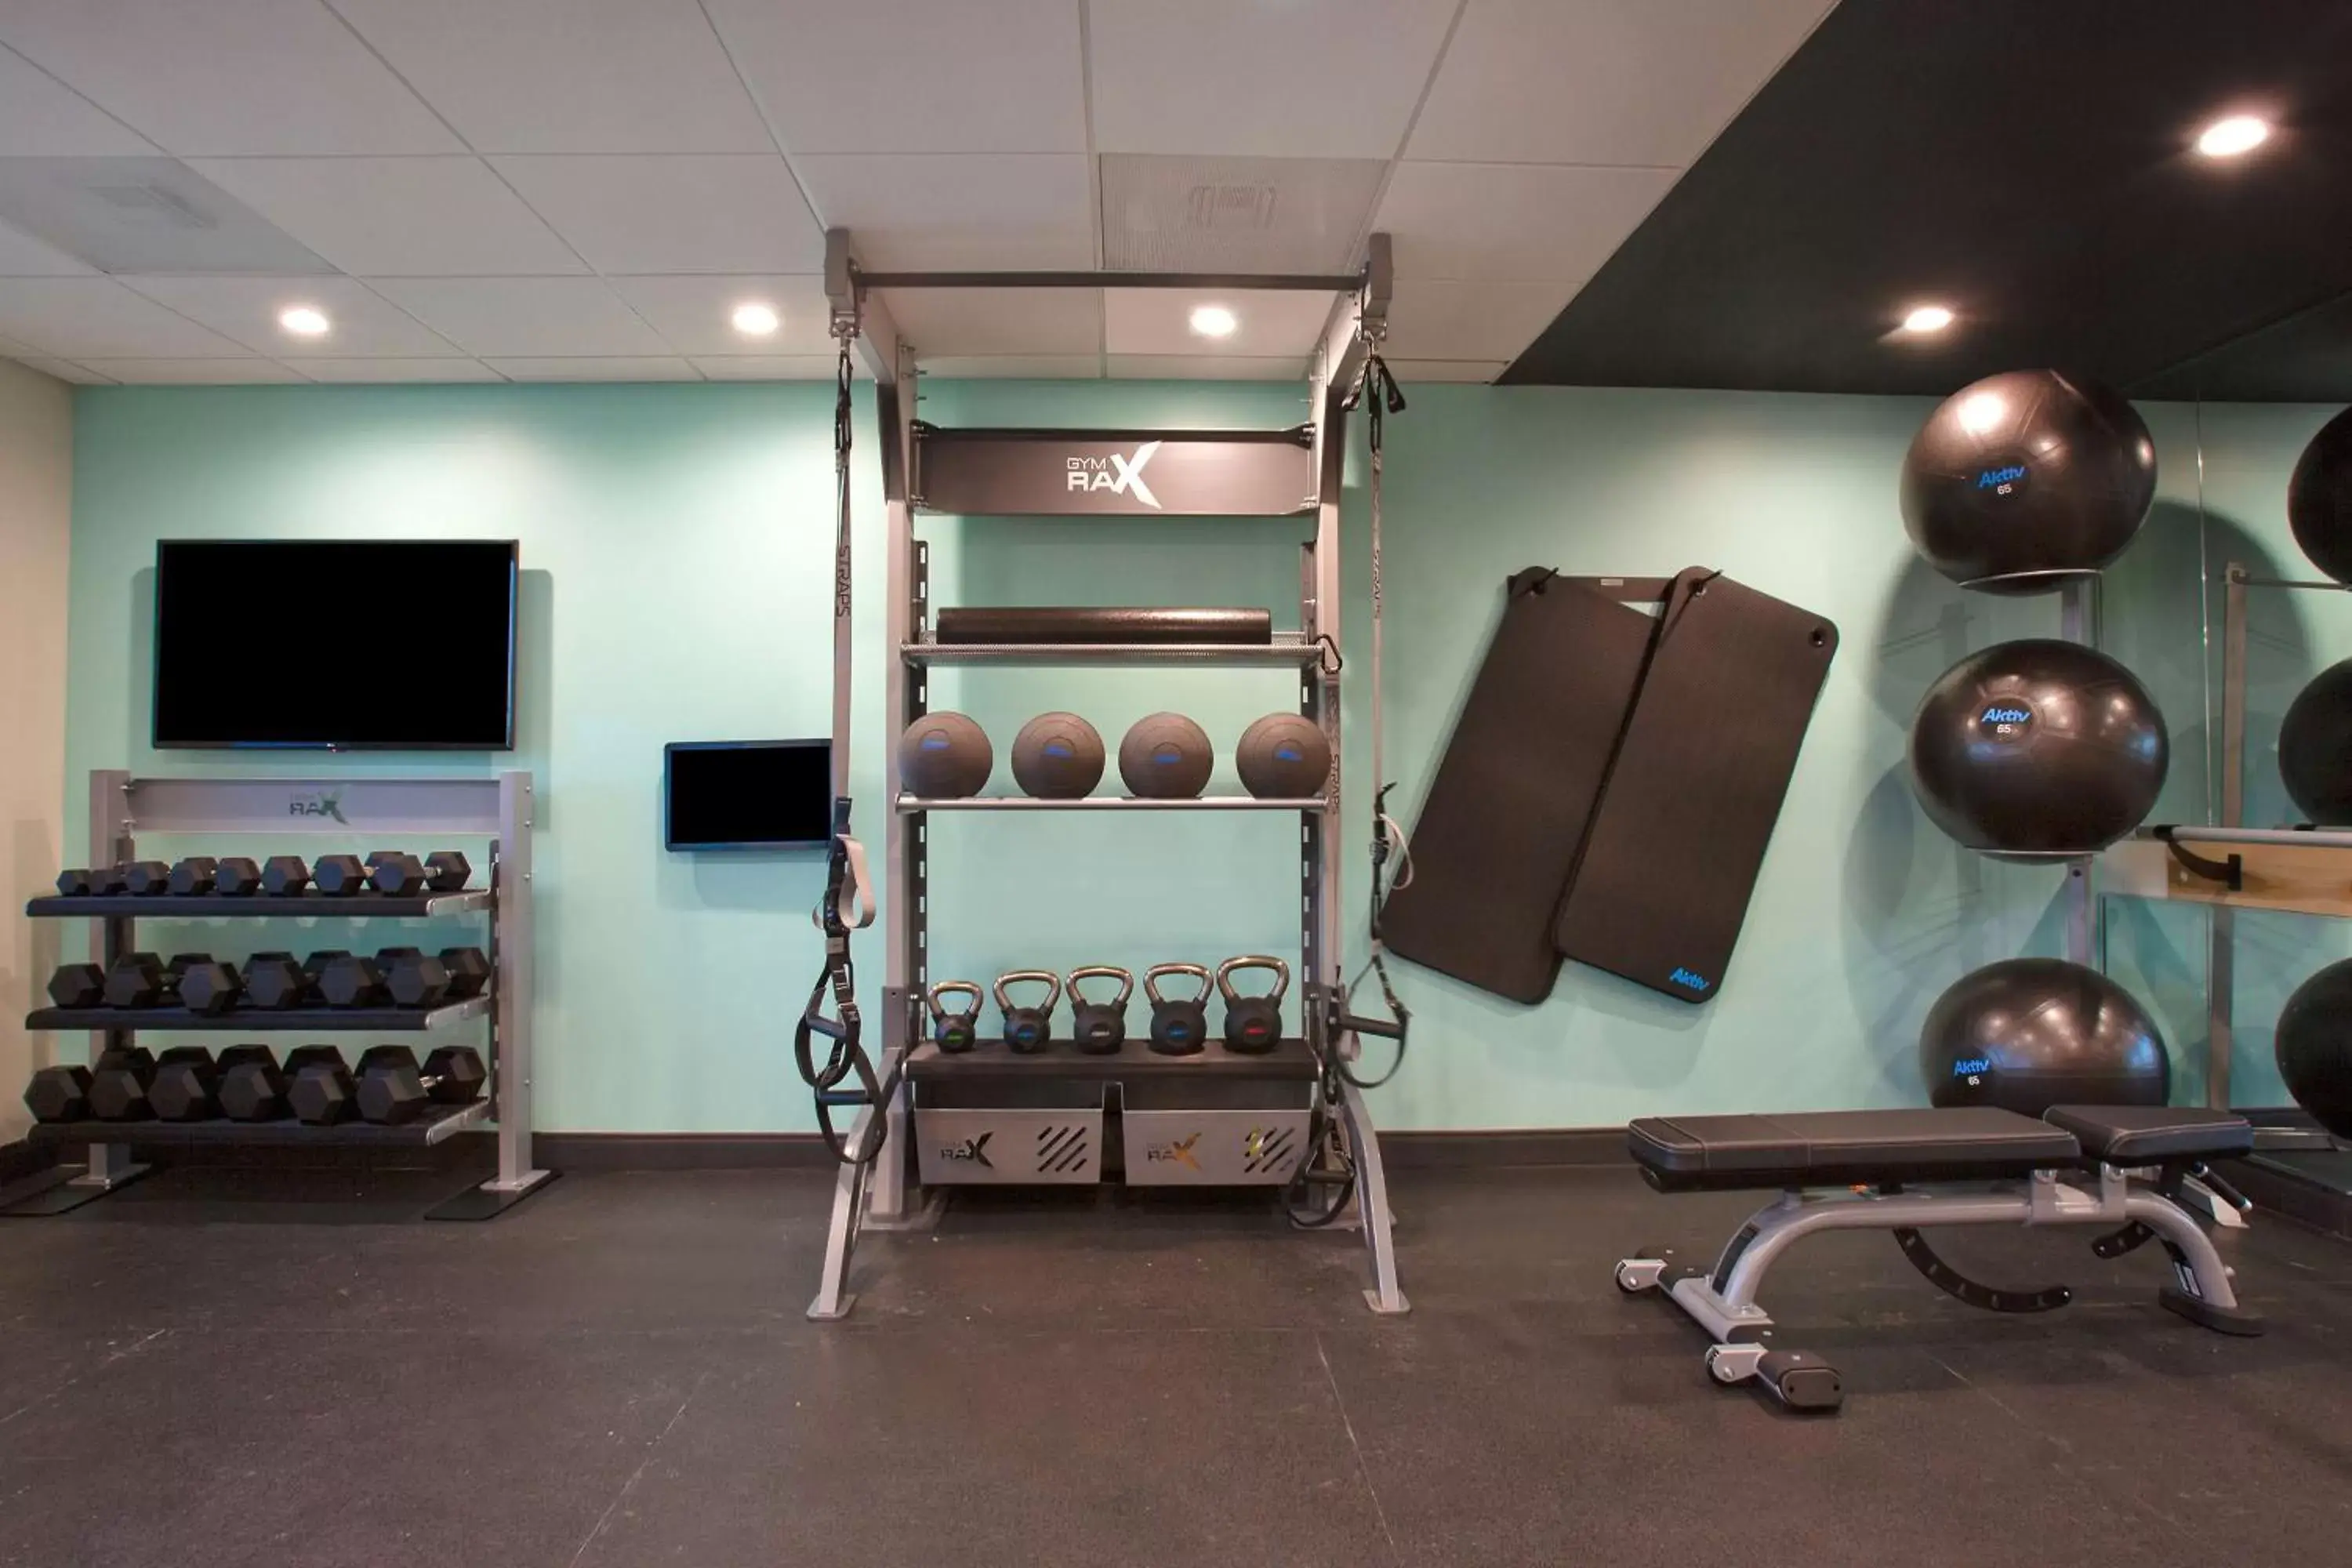 Fitness centre/facilities, Fitness Center/Facilities in Tru By Hilton Alcoa Knoxville Airport, Tn